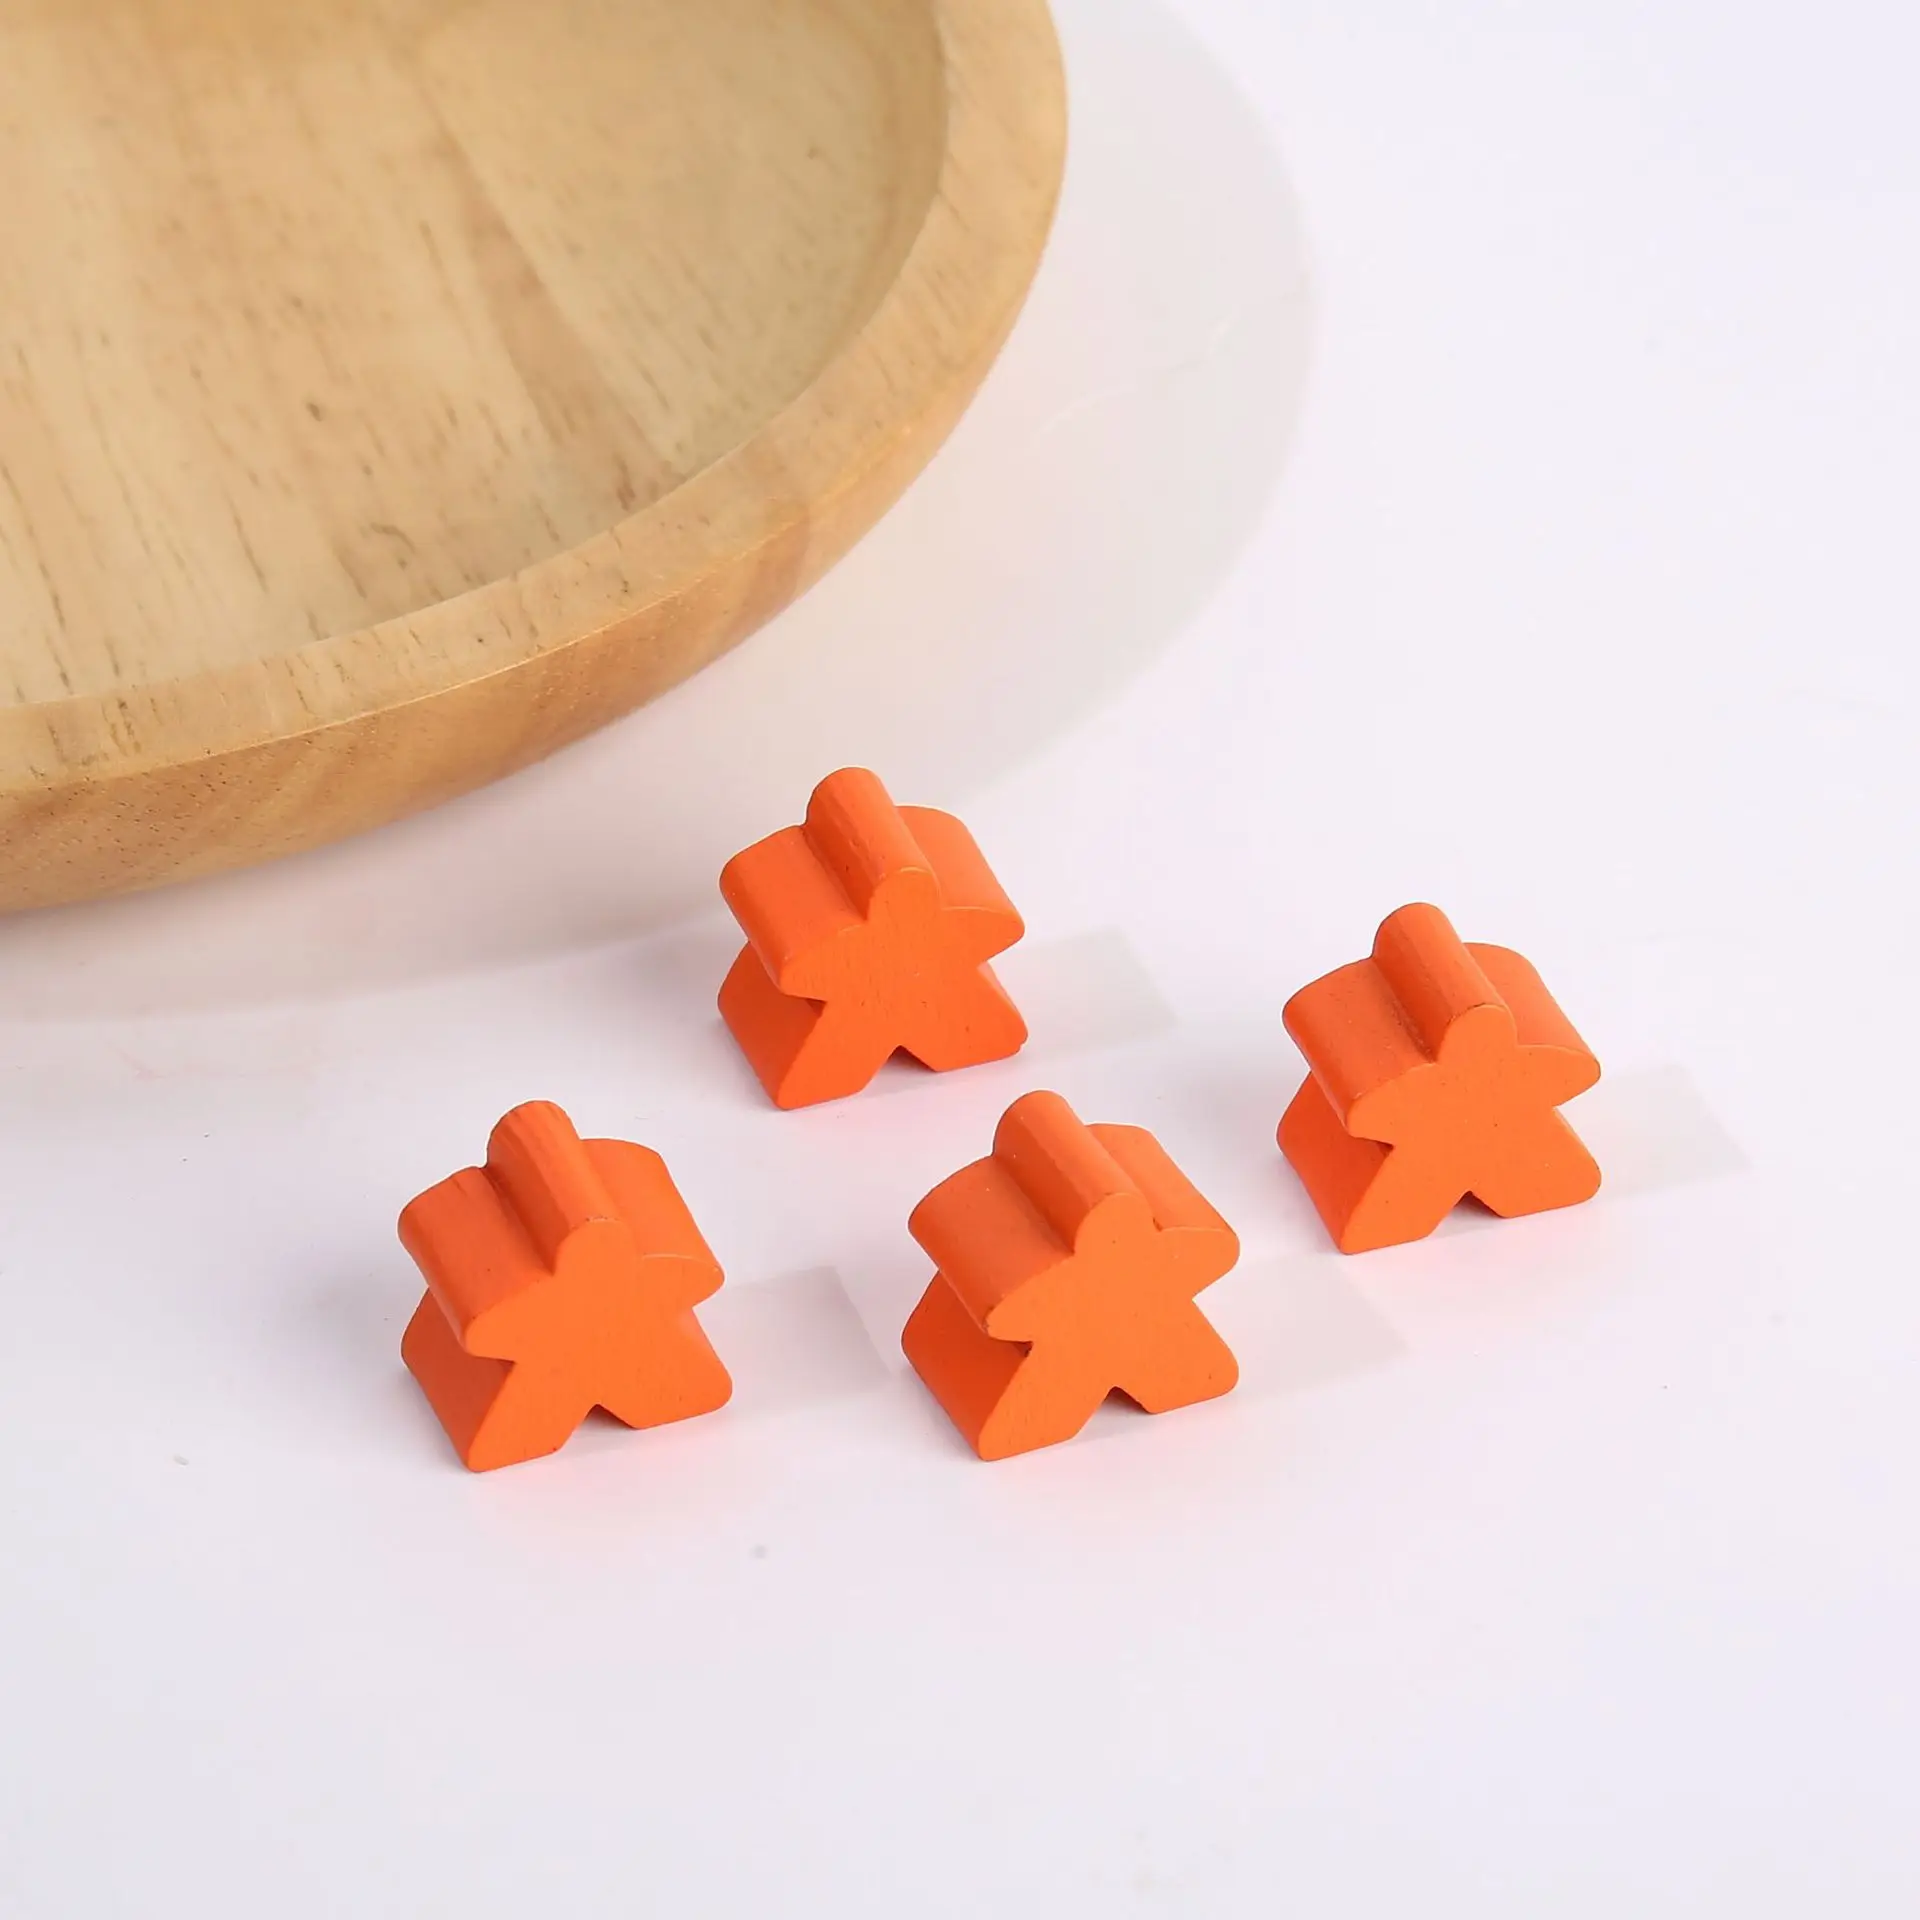 12PCS Wooden Humanoid Meeples Pawn Chess Pieces 12 Colors